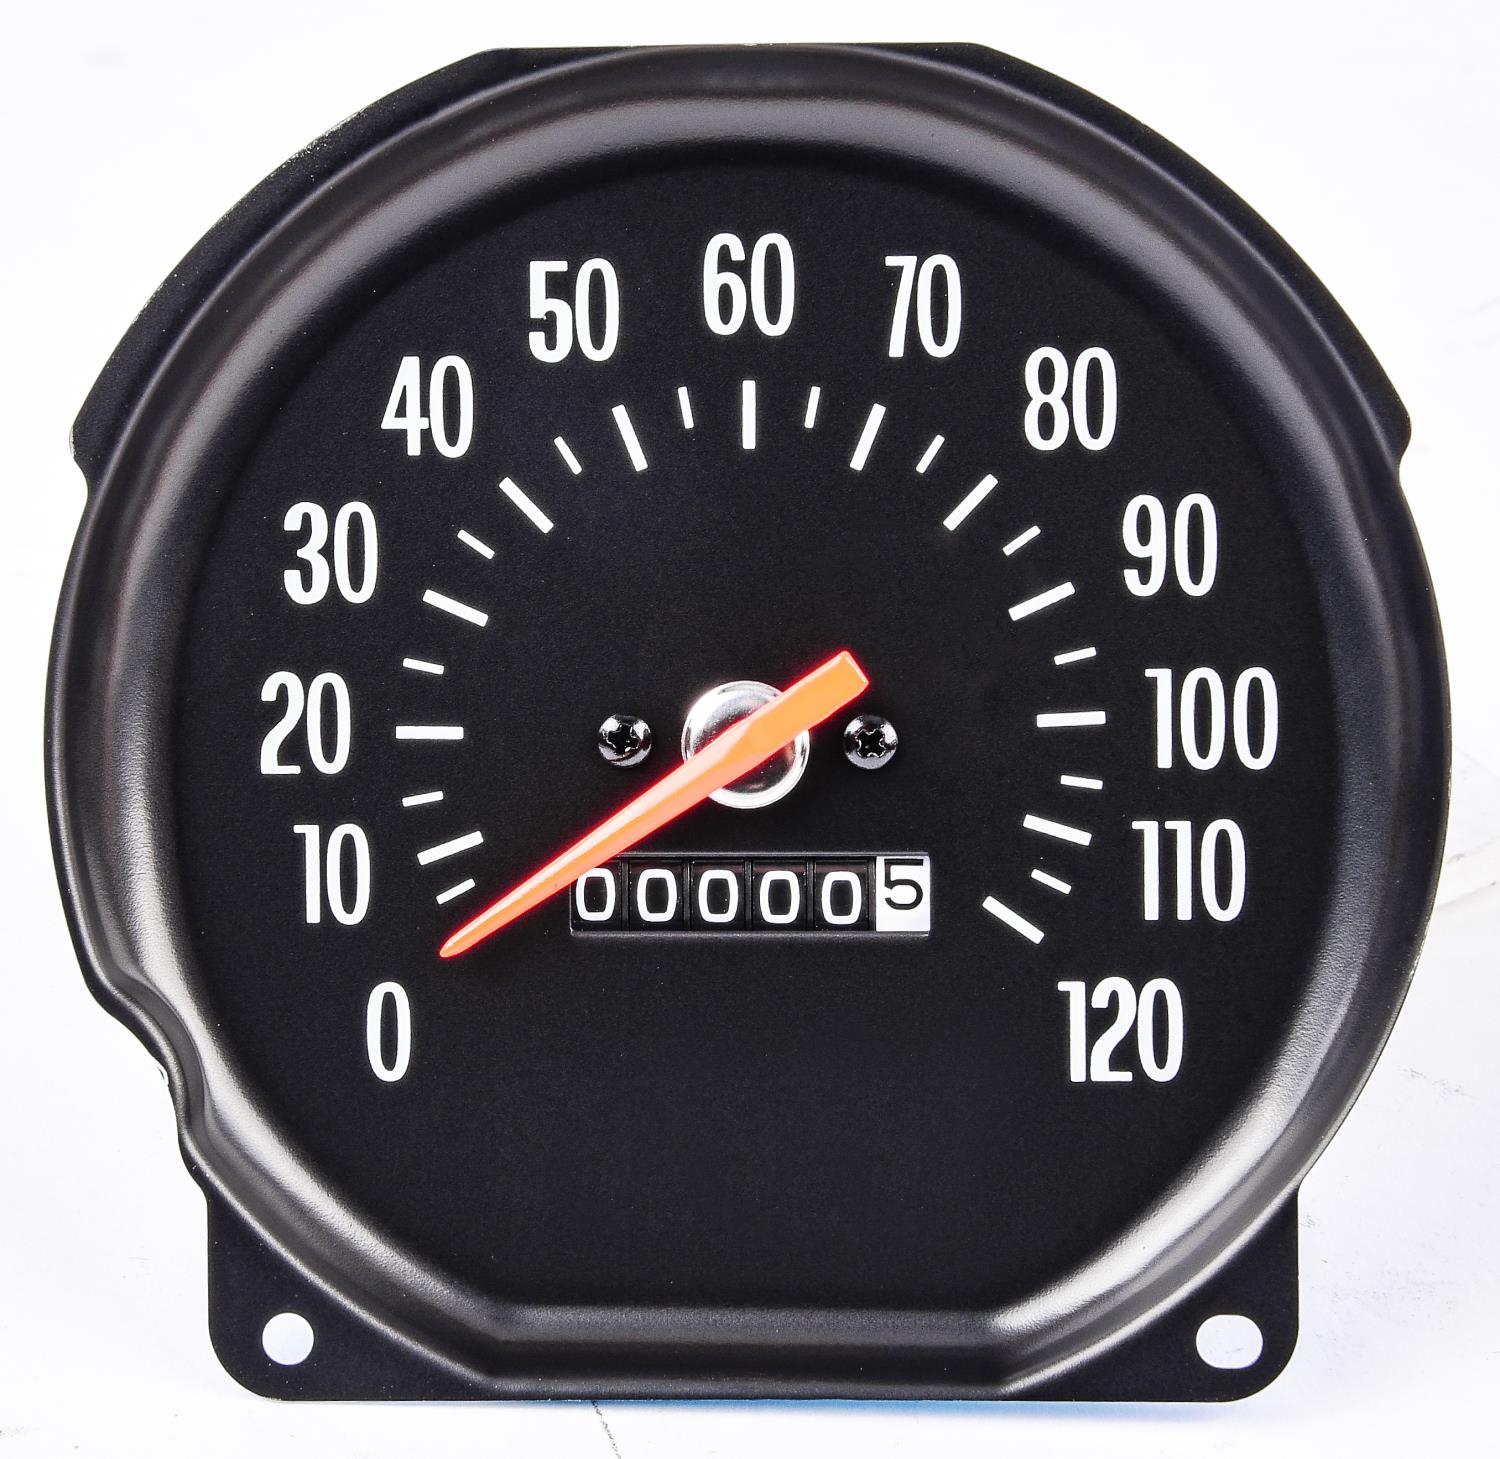 Factory Style Speedometer for 1971-1972 Chevrolet Chevelle, El Camino and Monte Carlo with SS Dash and Floor Shift [0-120 MPH]